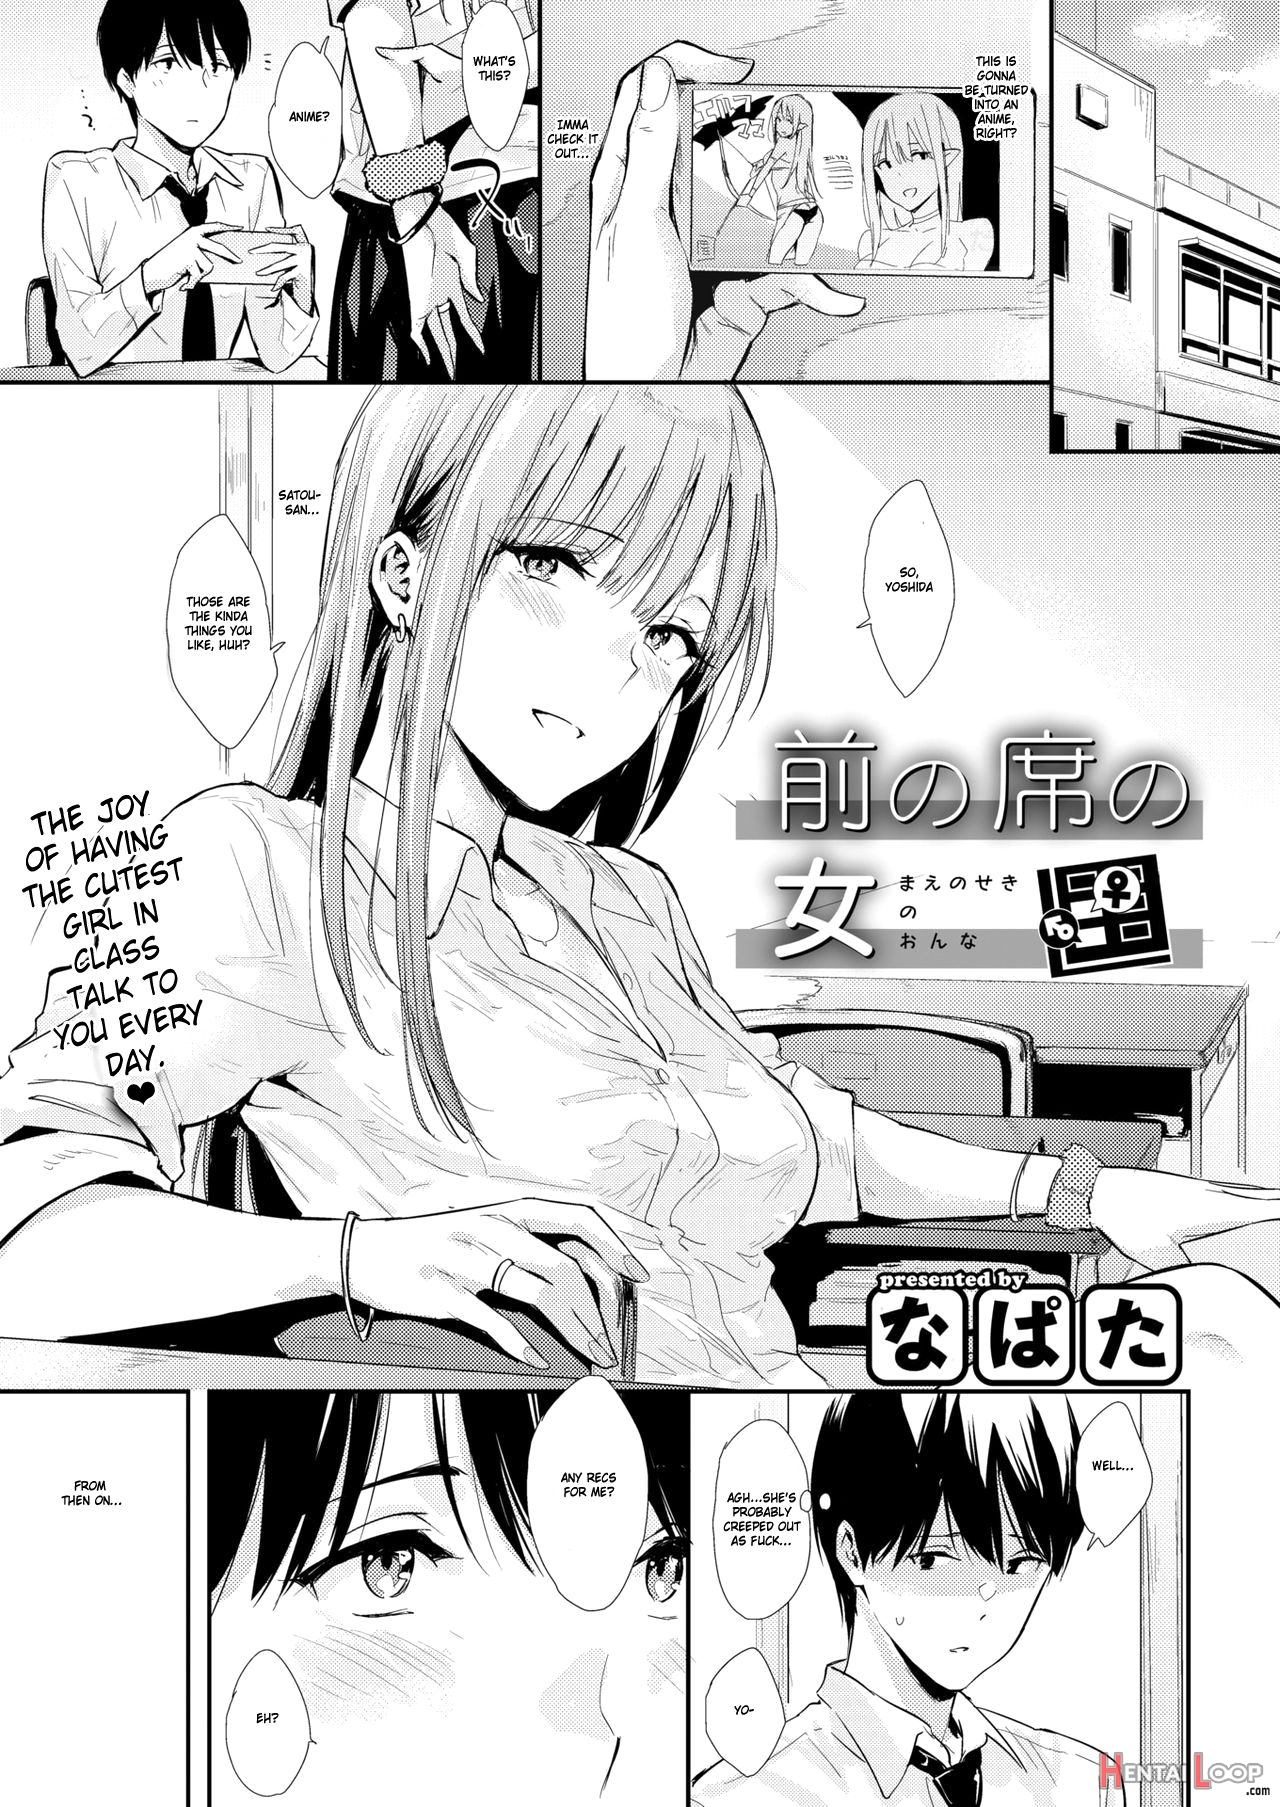 The Girl In The Seat In Front Of Me (by Napata) photo